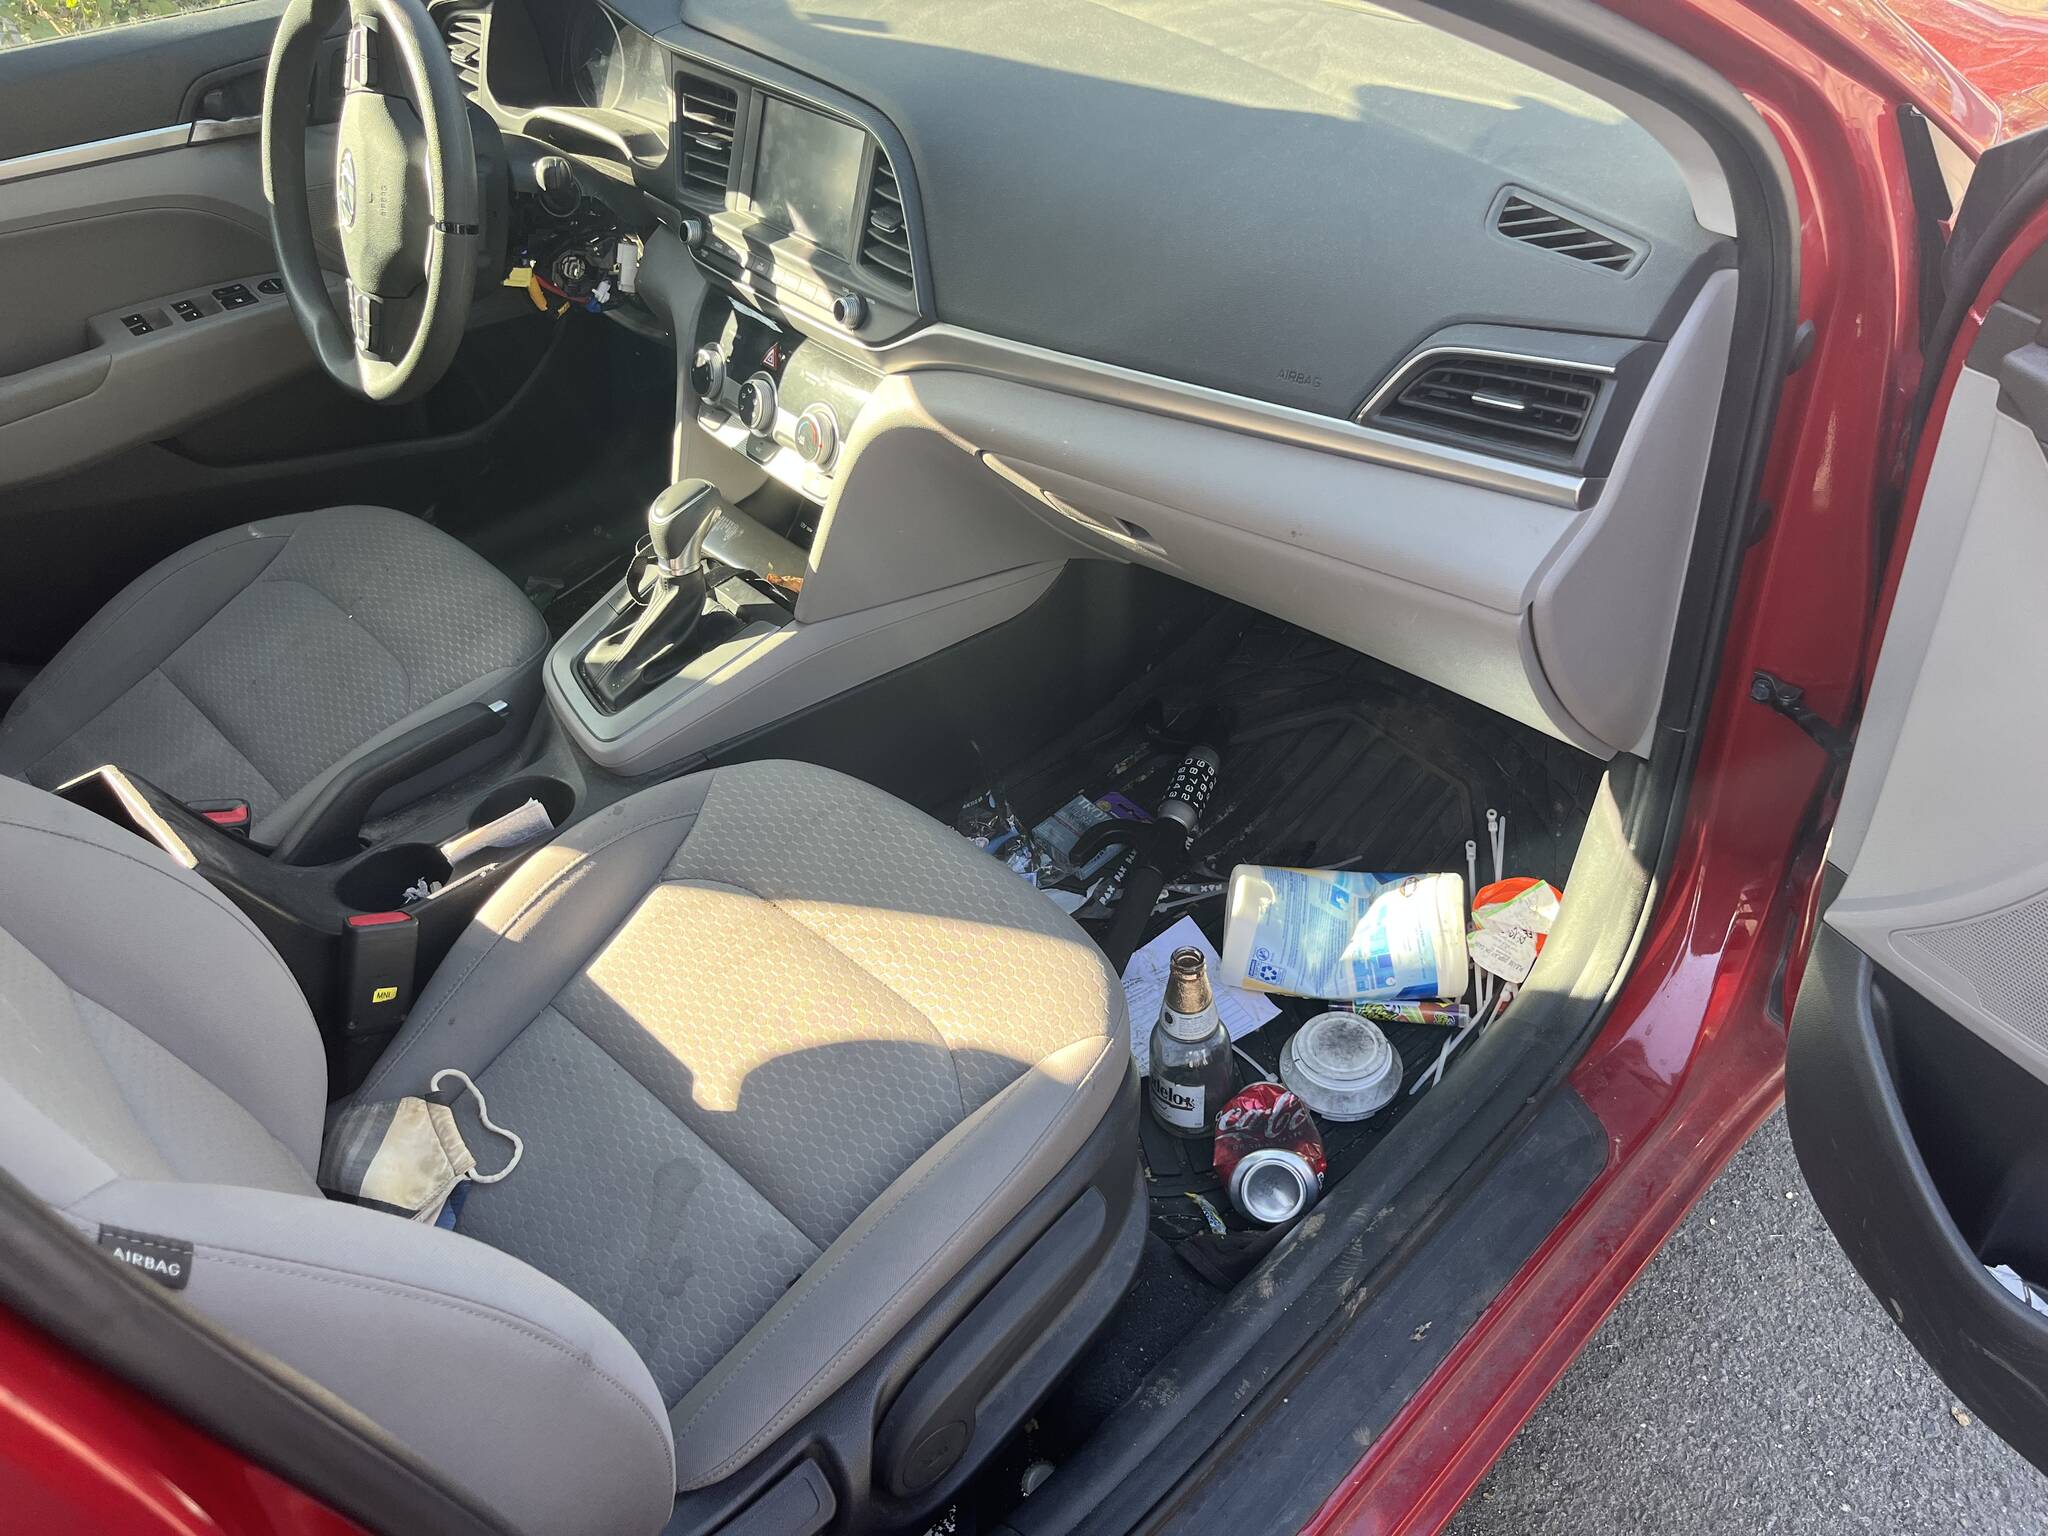 A glass of beer, a joint, a box of unopened condoms and a steering wheel lock on the floor of Doug Lindquist’s 2019 Hyundai Elantra. (Photo by Ben Leung/Renton Reporter)